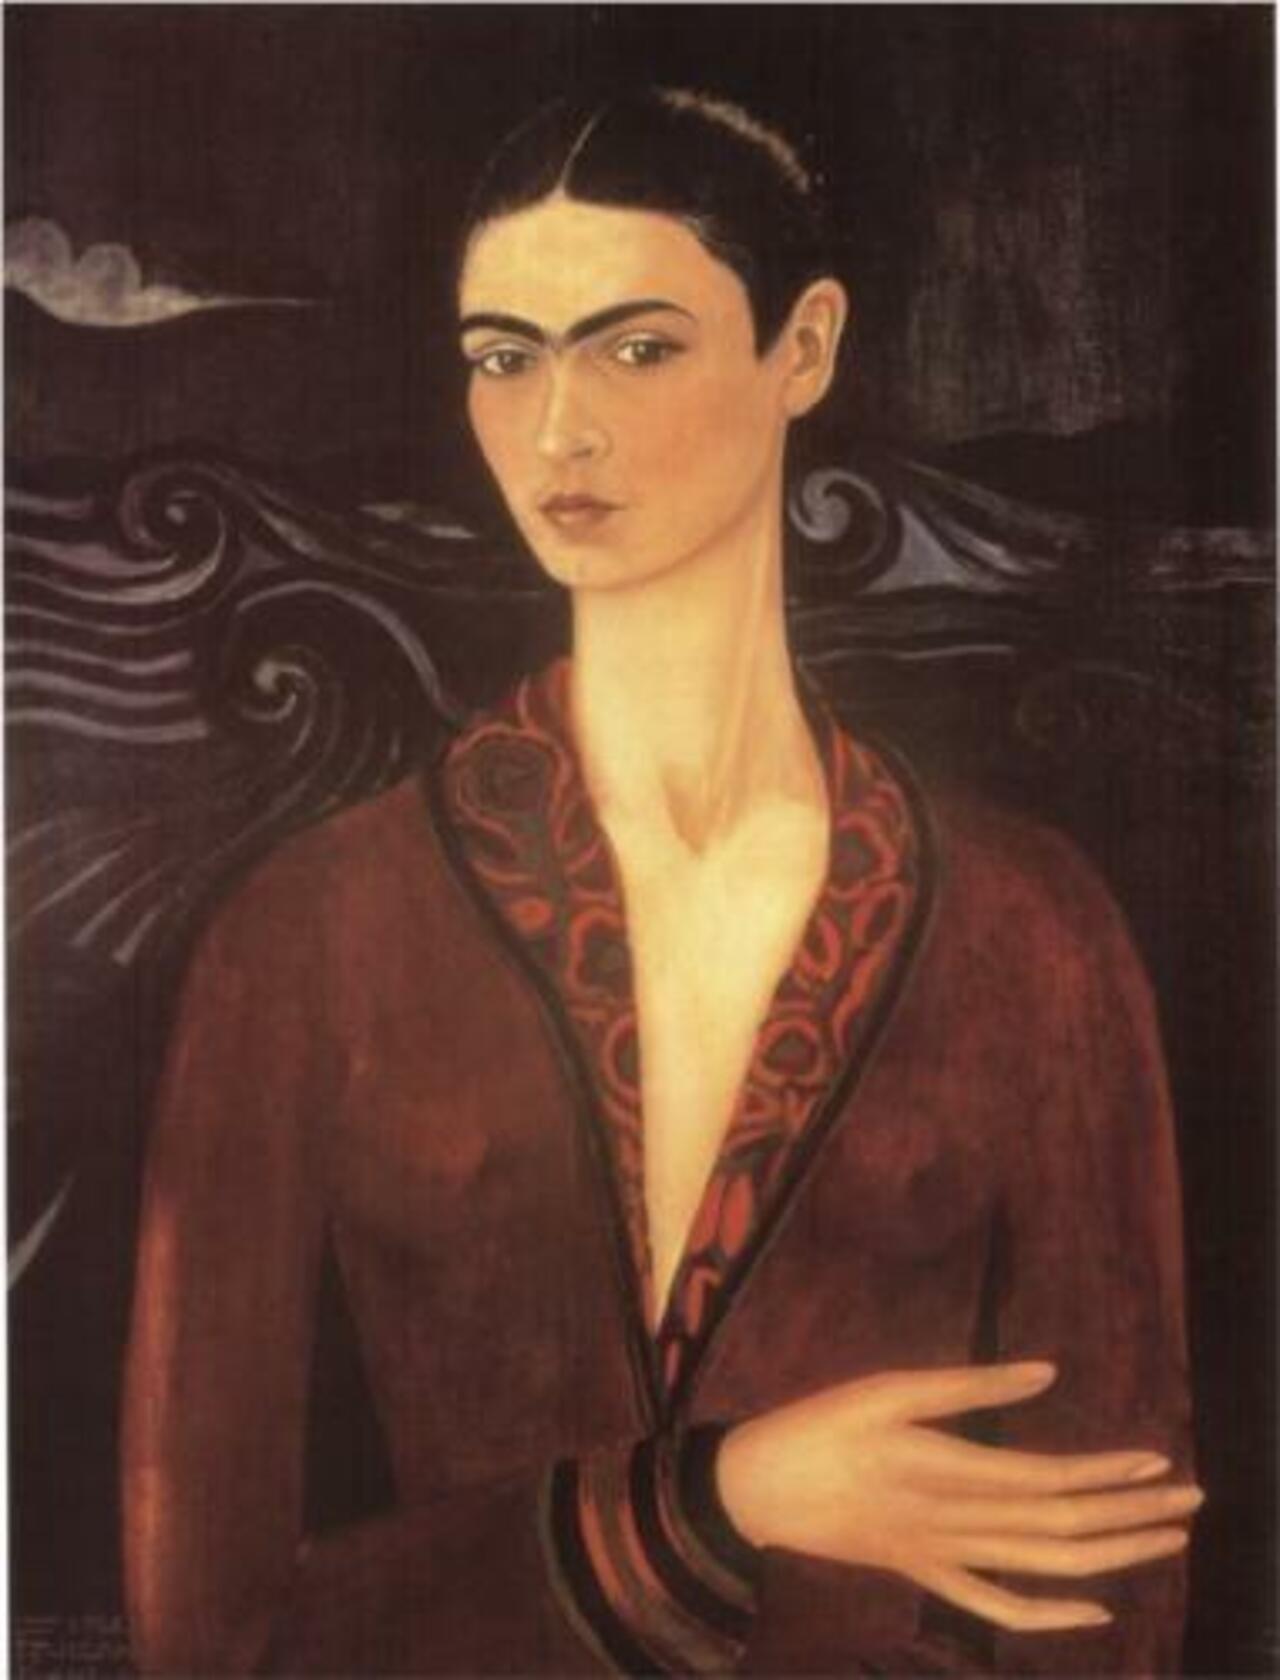 How beautiful is #FridaKahlo first ever #painting: her “Self Portrait in a Velvet Dress,” completed in 1926 #art http://t.co/pd4Co4Q60t